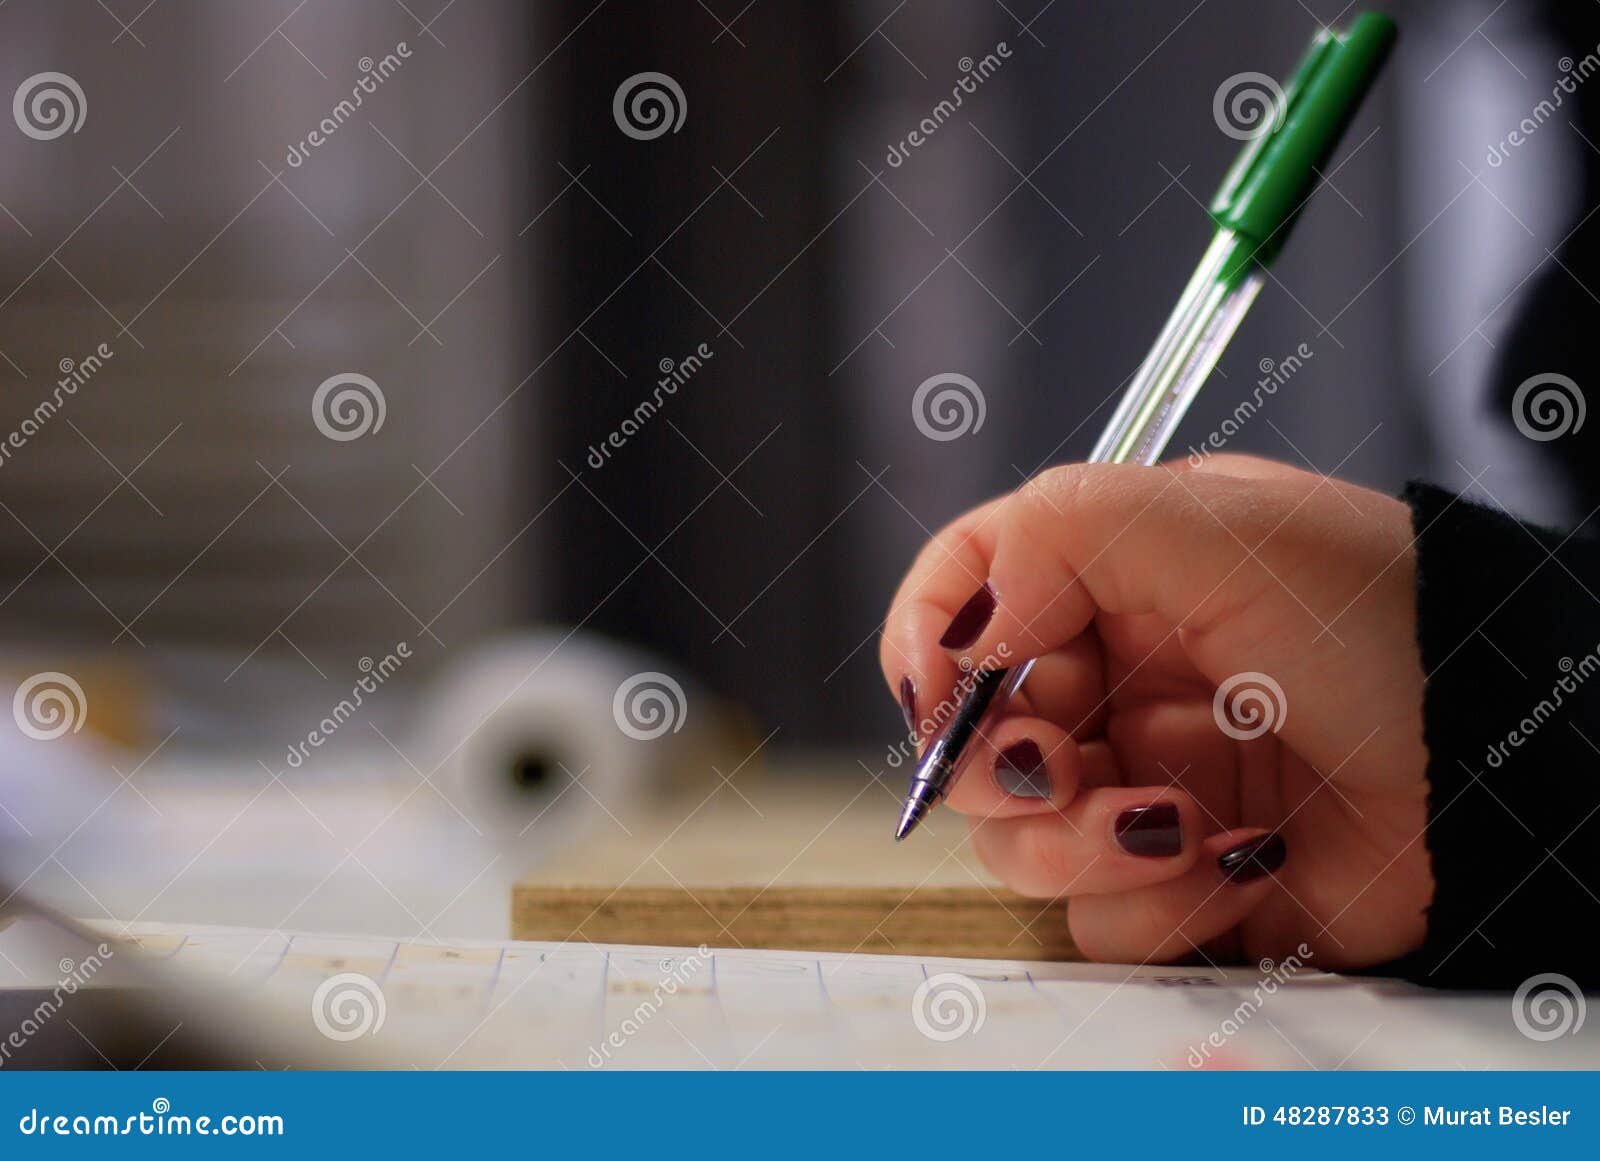 Solving a crossword puzzle stock image. Image of clue - 48287833